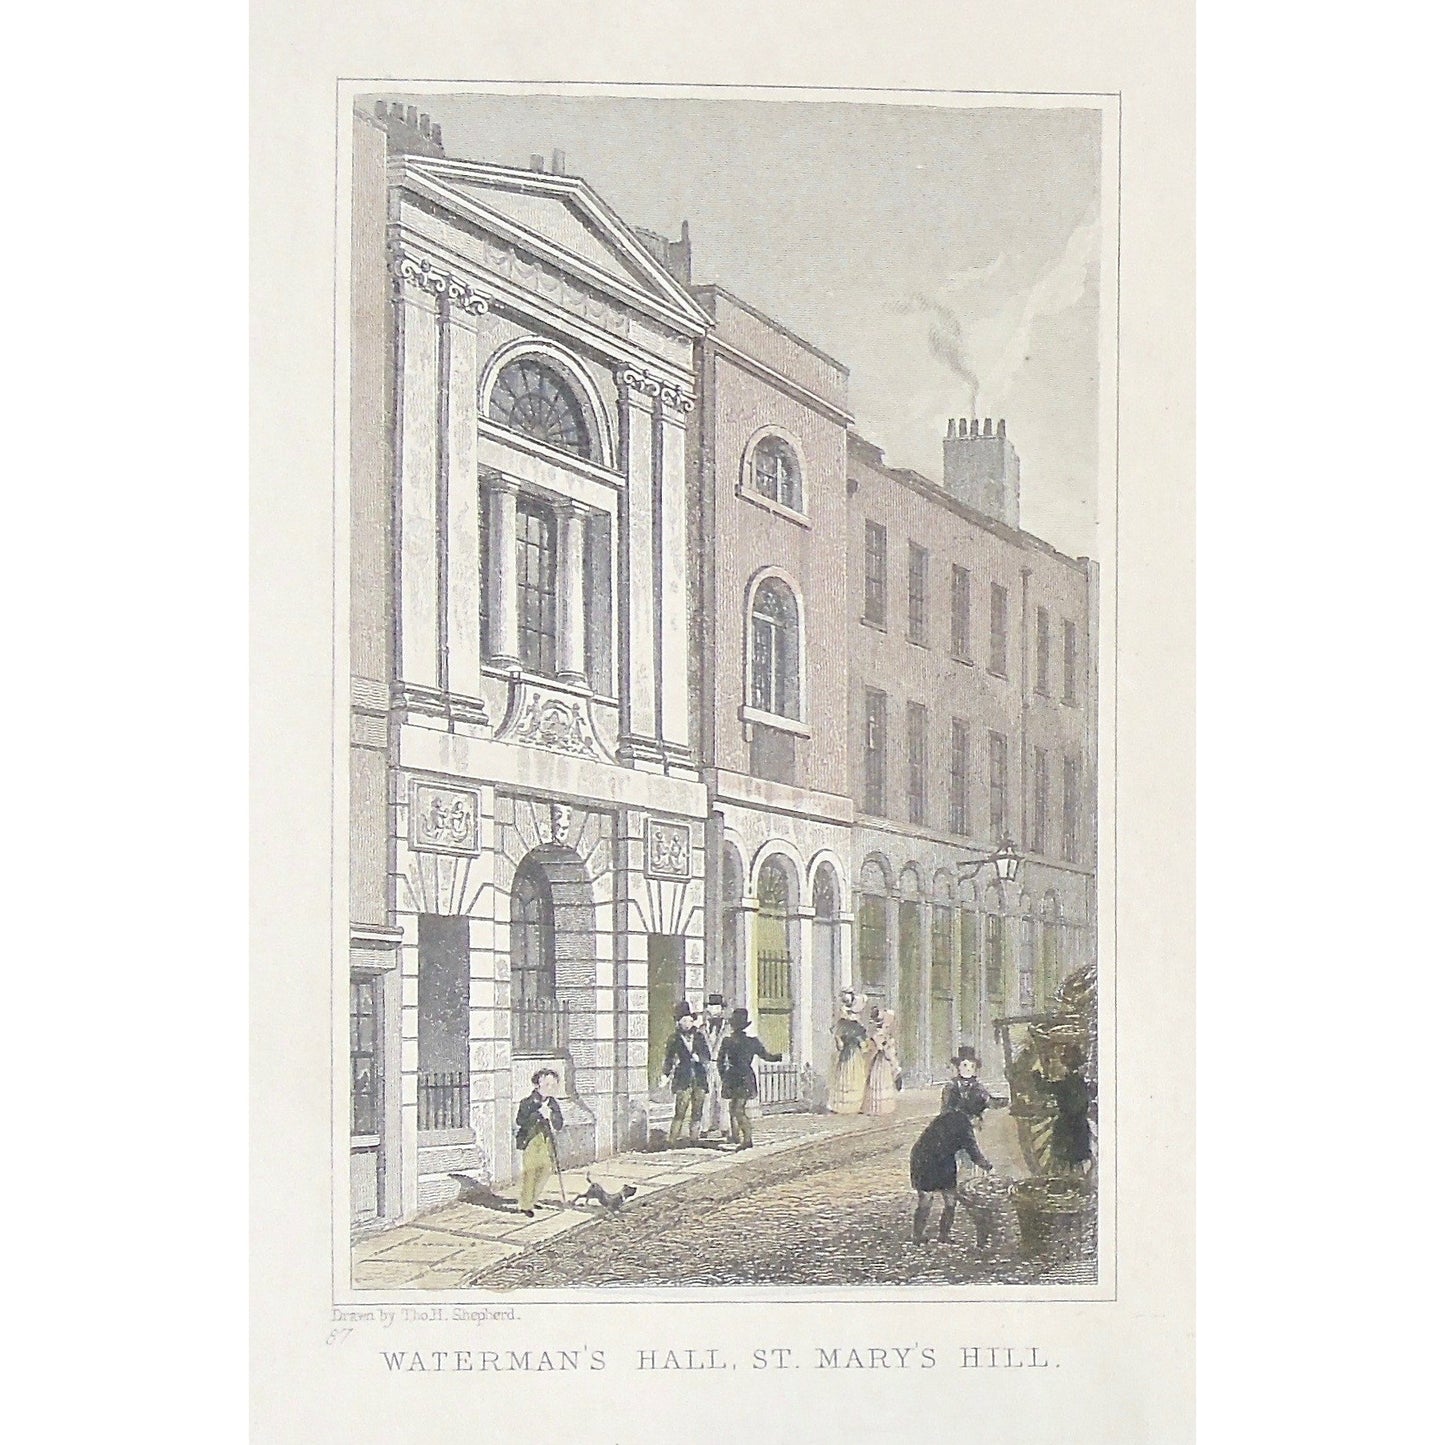 Waterman's Hall, St. Mary's Hill. / Painter Stainer's Hall, Little Trinity Lane. / Winchester House, Winchester Street.  (S2-45)